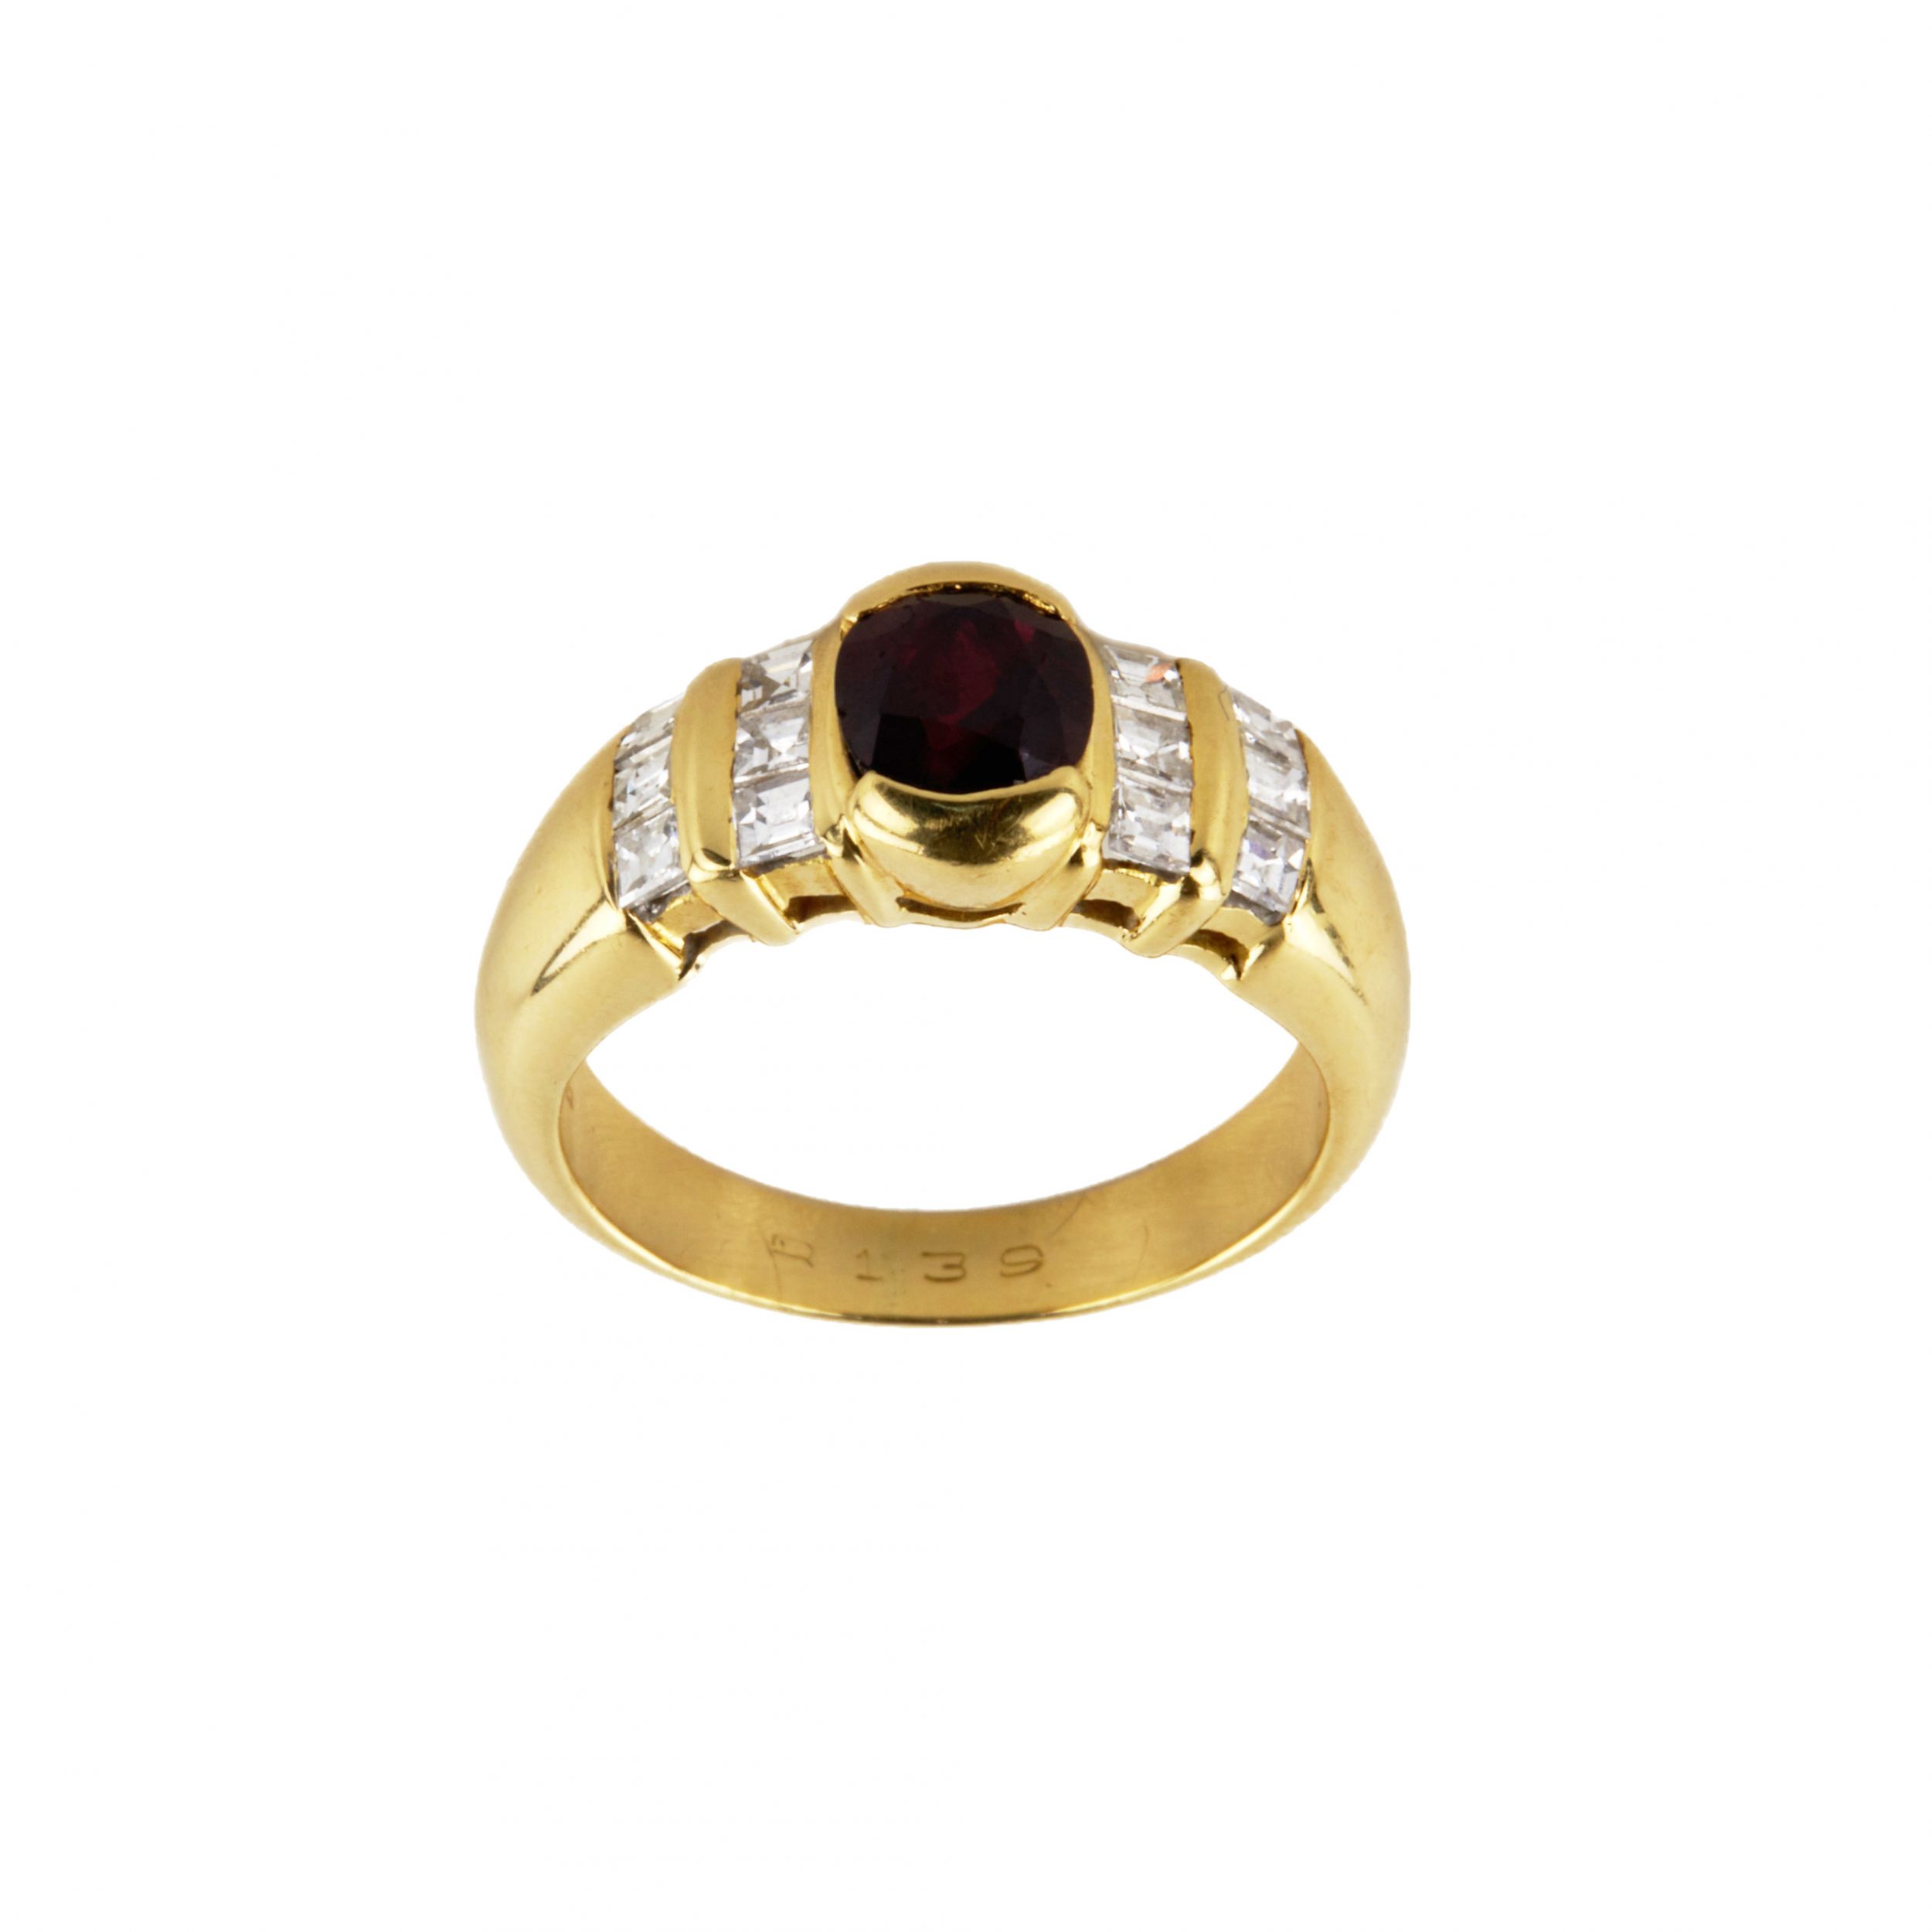 Moraglione-gold-ring-with-ruby-and-diamonds-